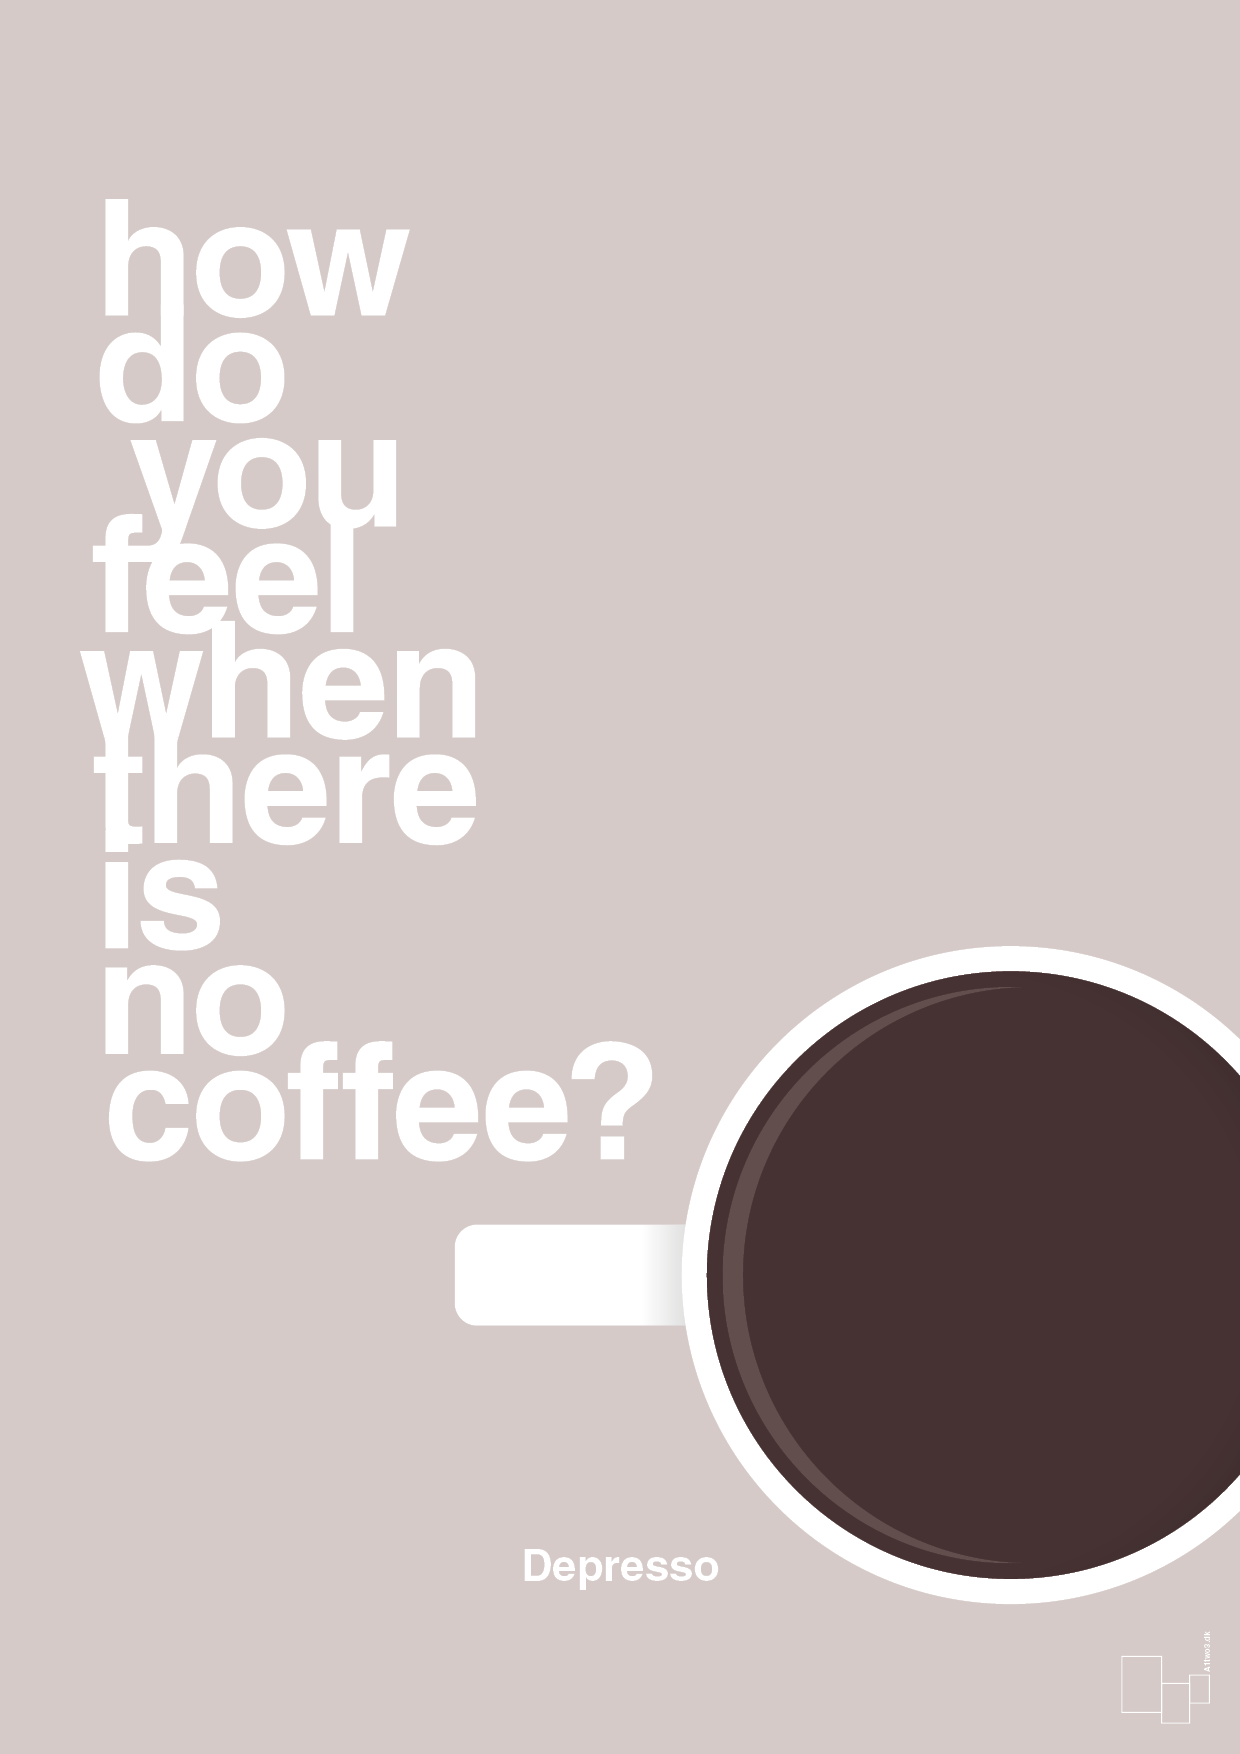 how do you feel when there is no coffee? depresso - Plakat med Mad & Drikke i Broken Beige